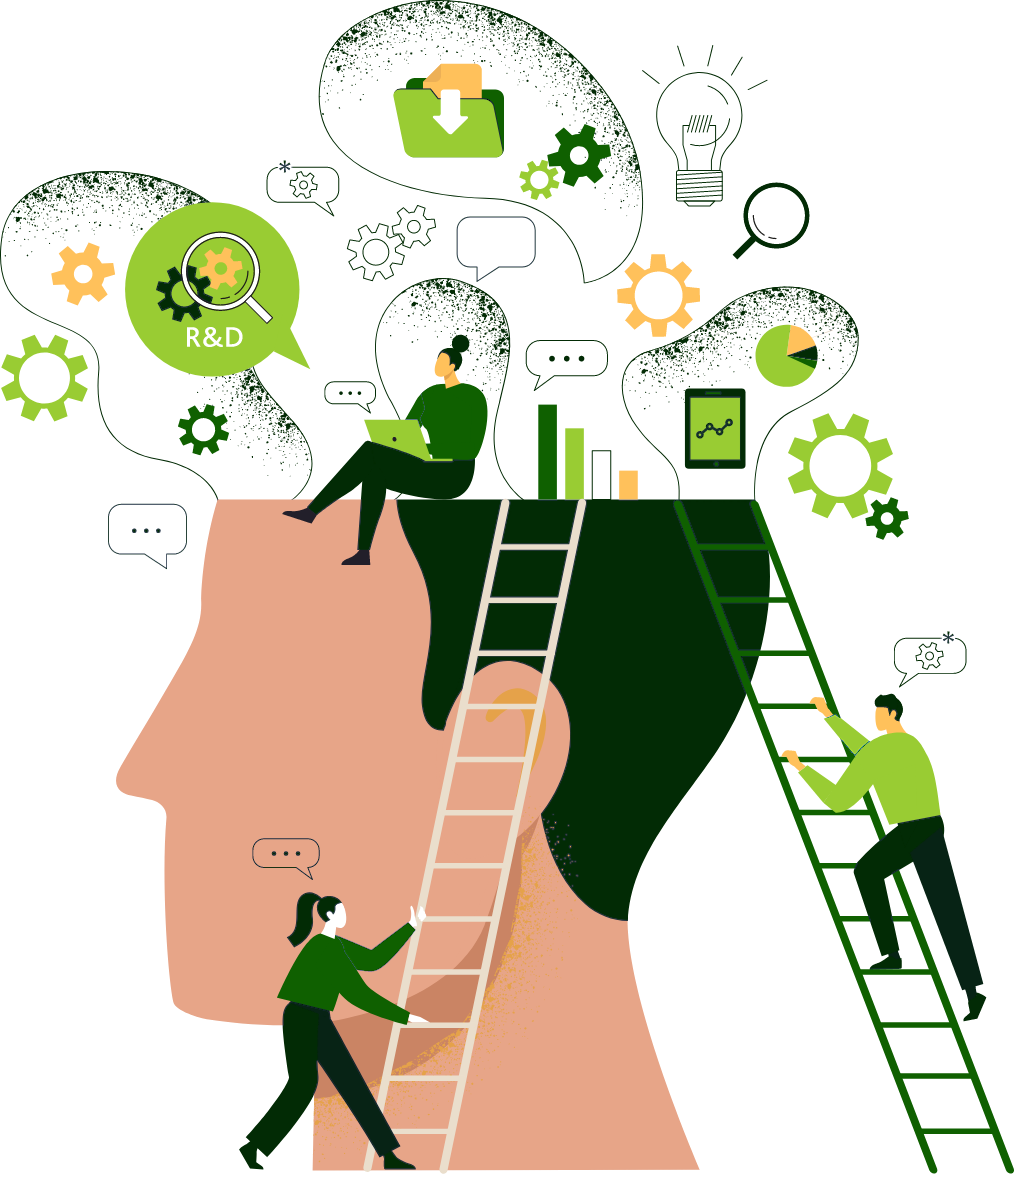 Illustration of 3 people climbing ladders in tech environment